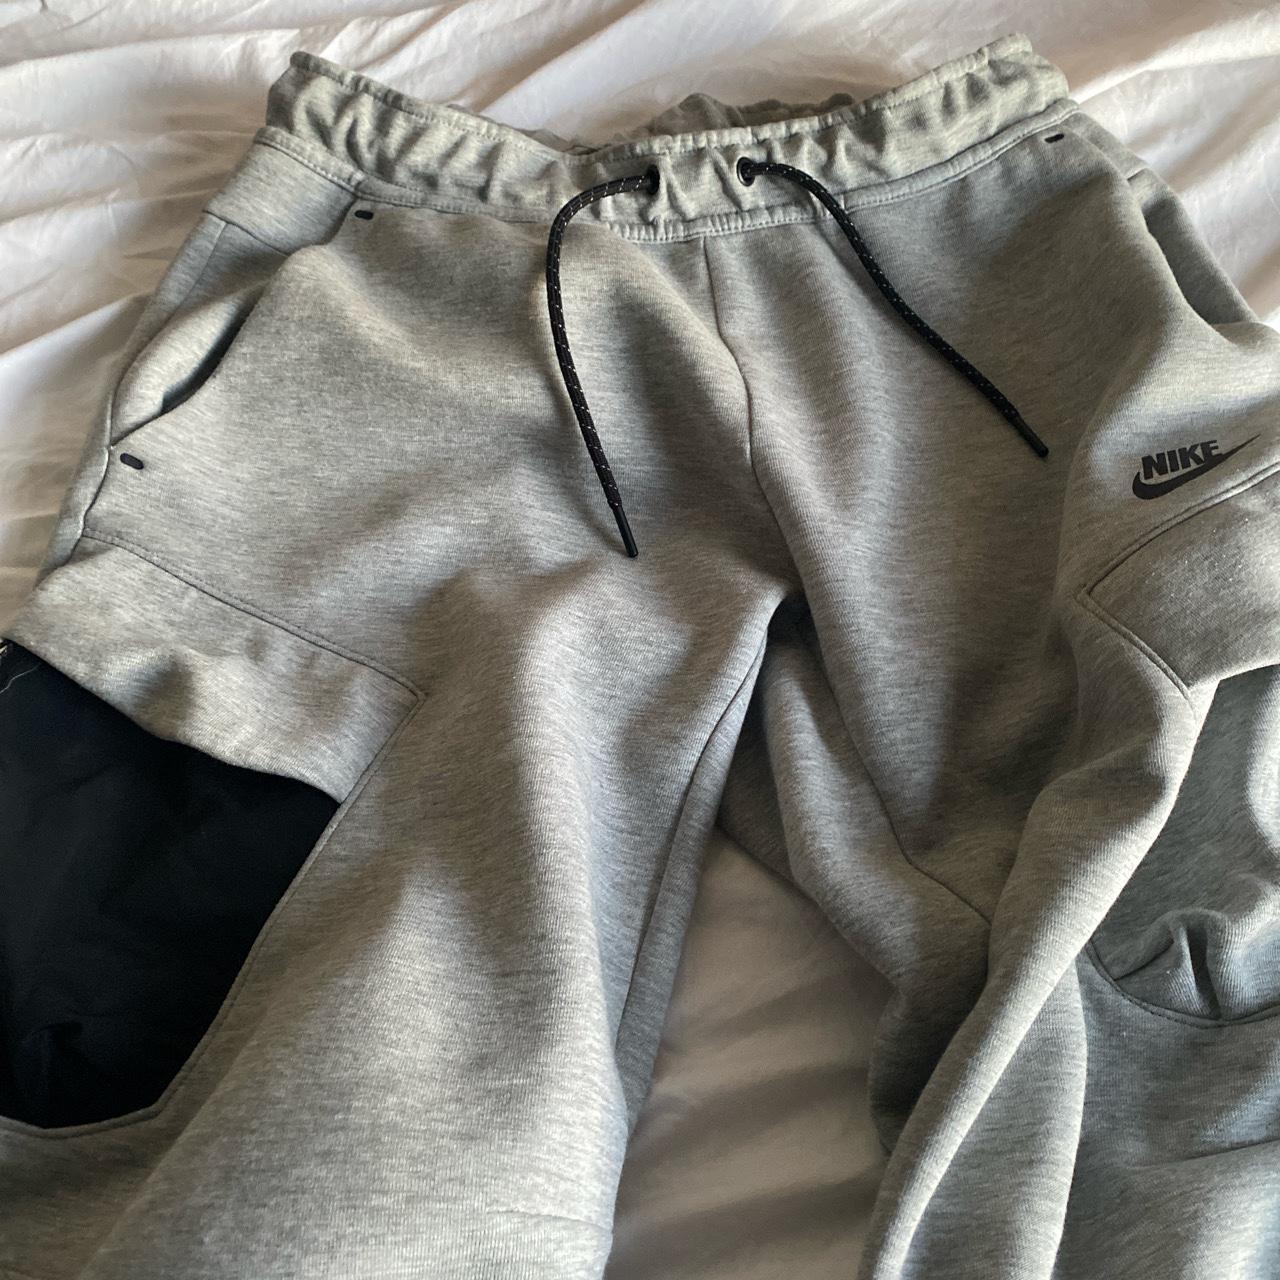 Great Nike tech cargos size small mens worn about 3... - Depop